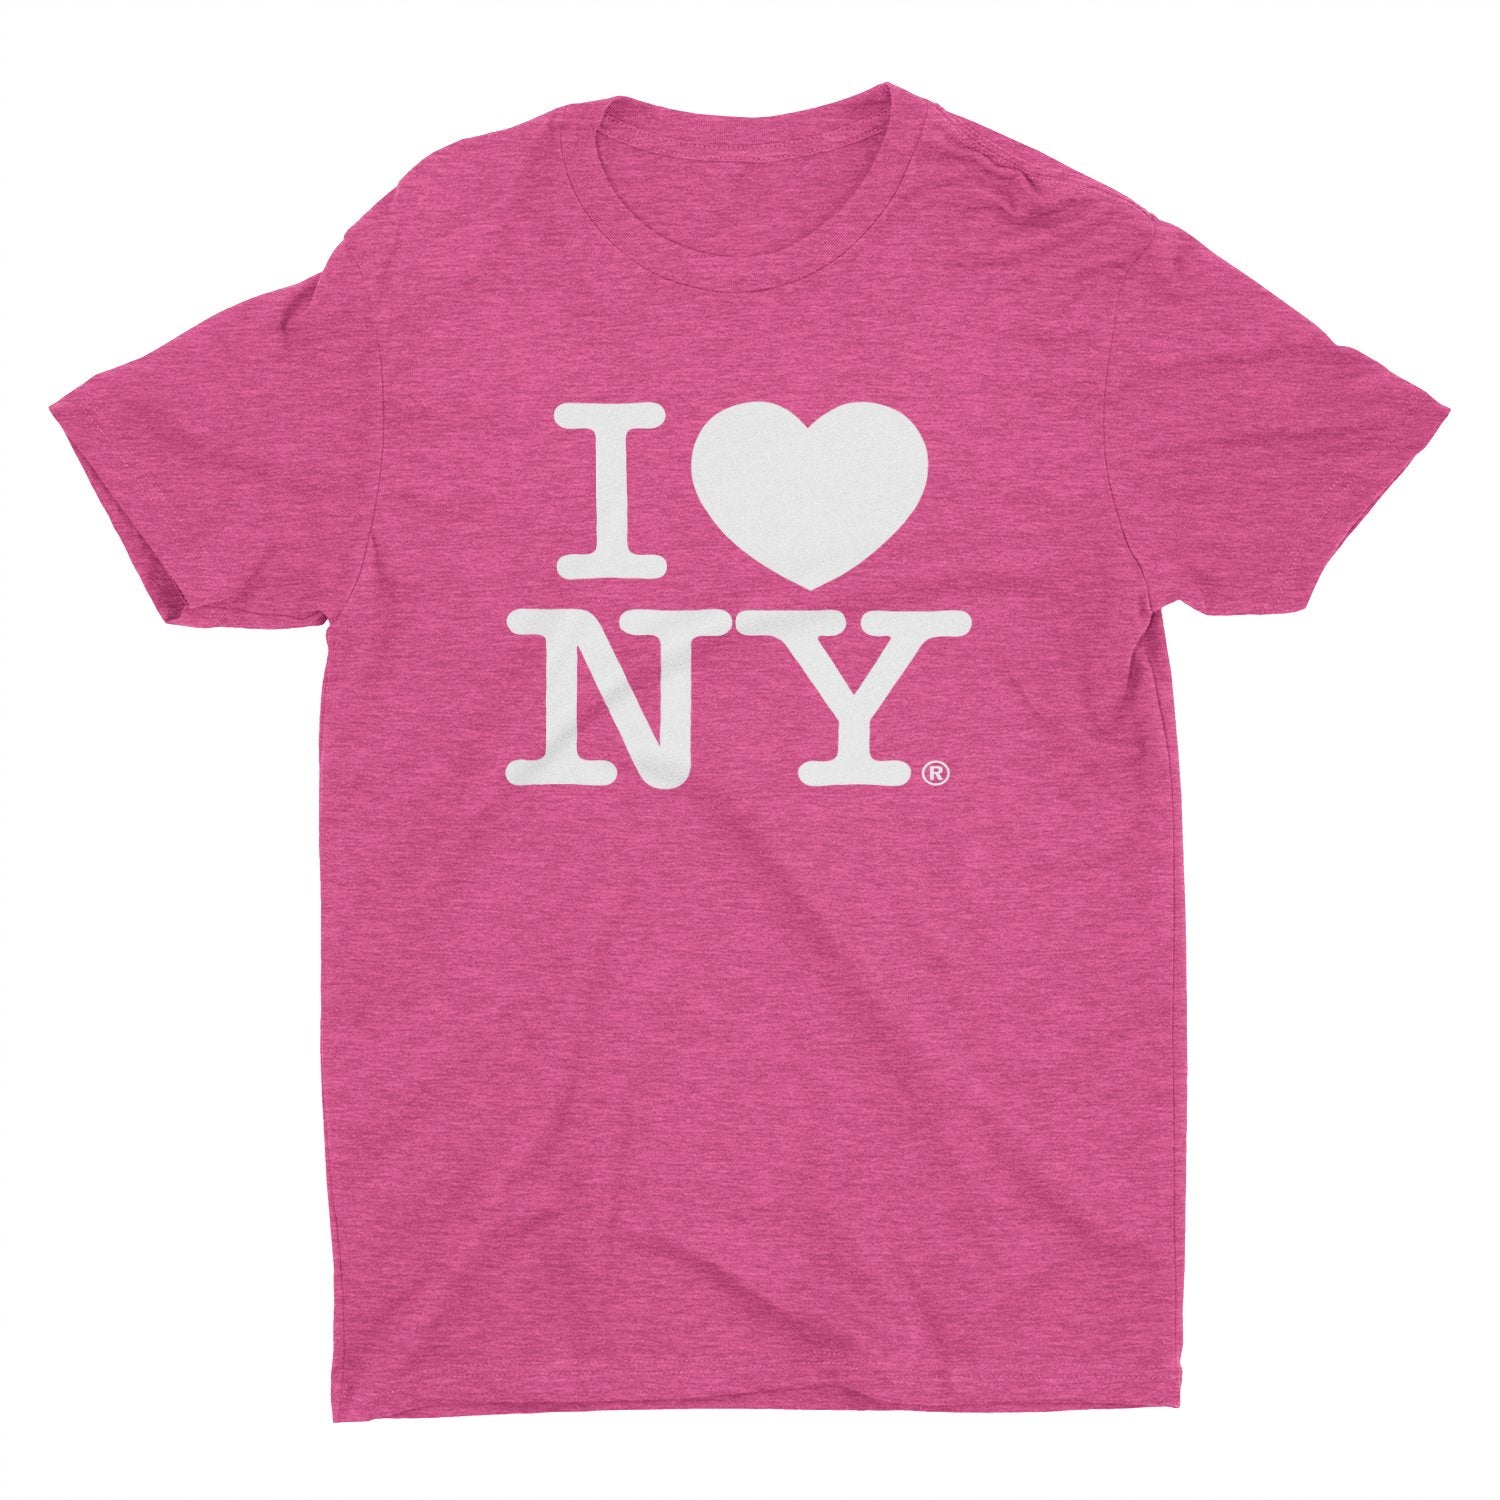 I Love NY Kids T-Shirt Officially Licensed Unisex Tee (Youth, Heather Pink)